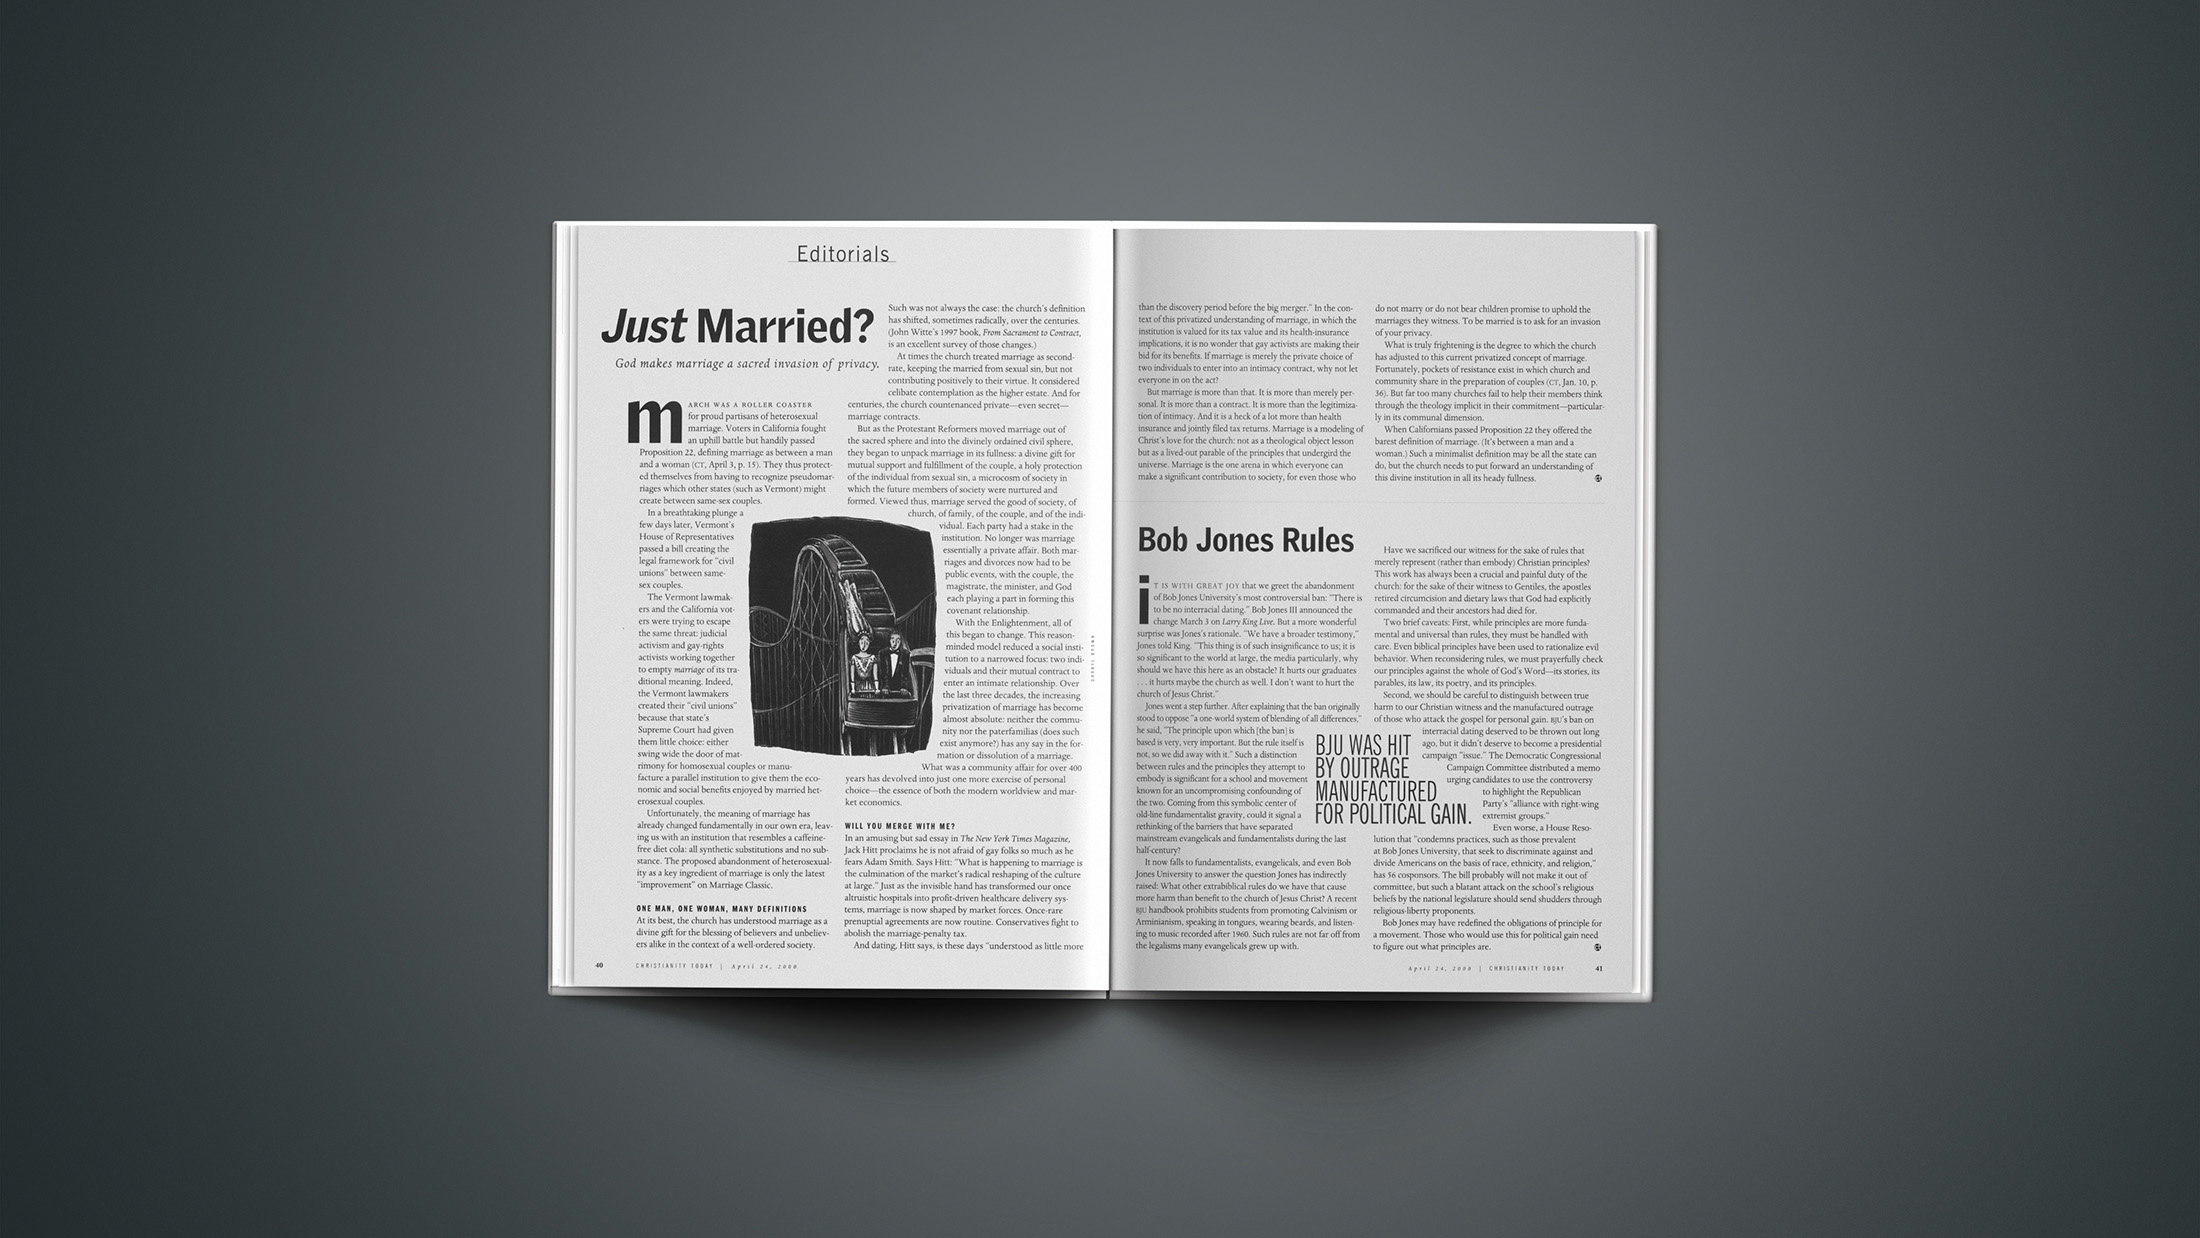 Just Married? Christianity Today